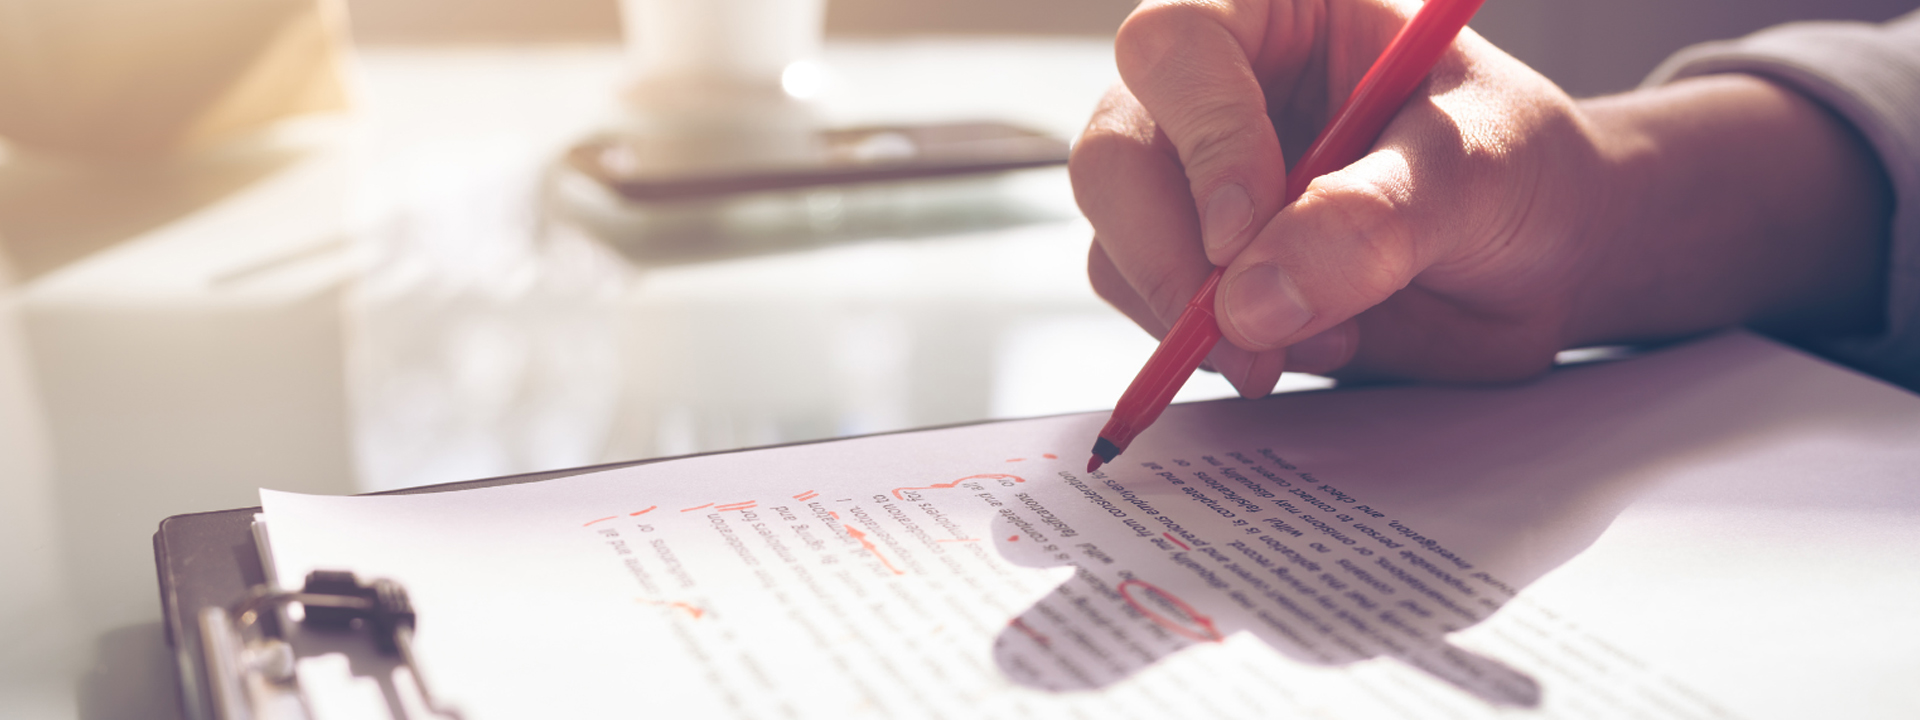 A hand holding a red pen makes corrections on a paper. Image courtesy of Canva